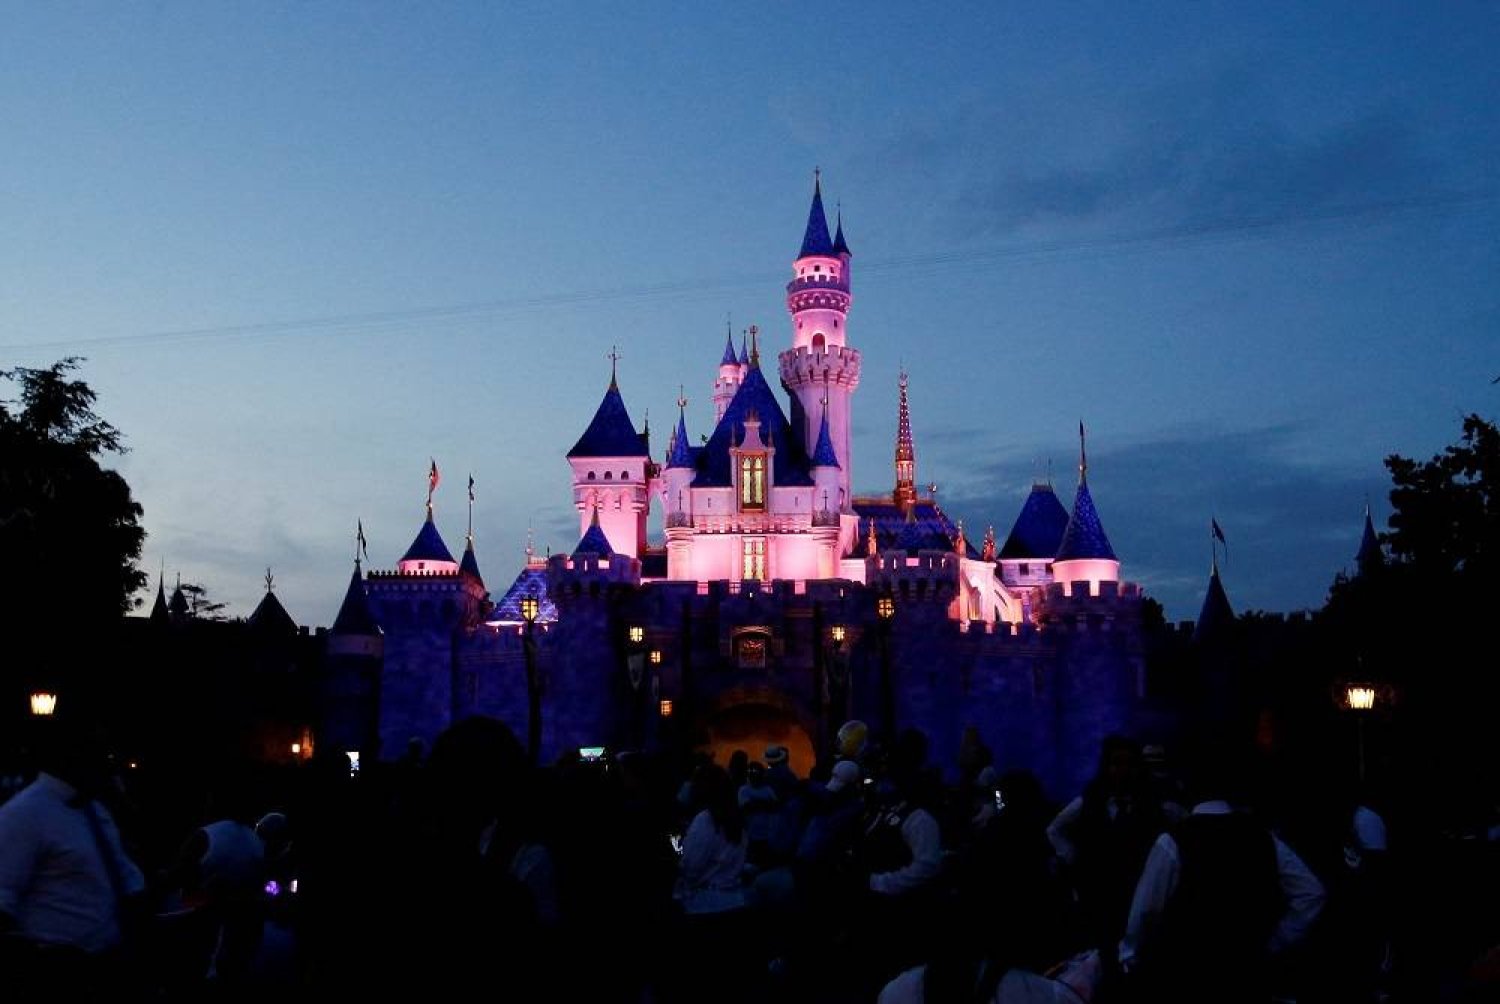 The Sleeping Beauty Castle is pictured at dusk at Disneyland Park in Anaheim, California, US, July 24, 2021. Picture taken July 24, 2021. (Reuters)